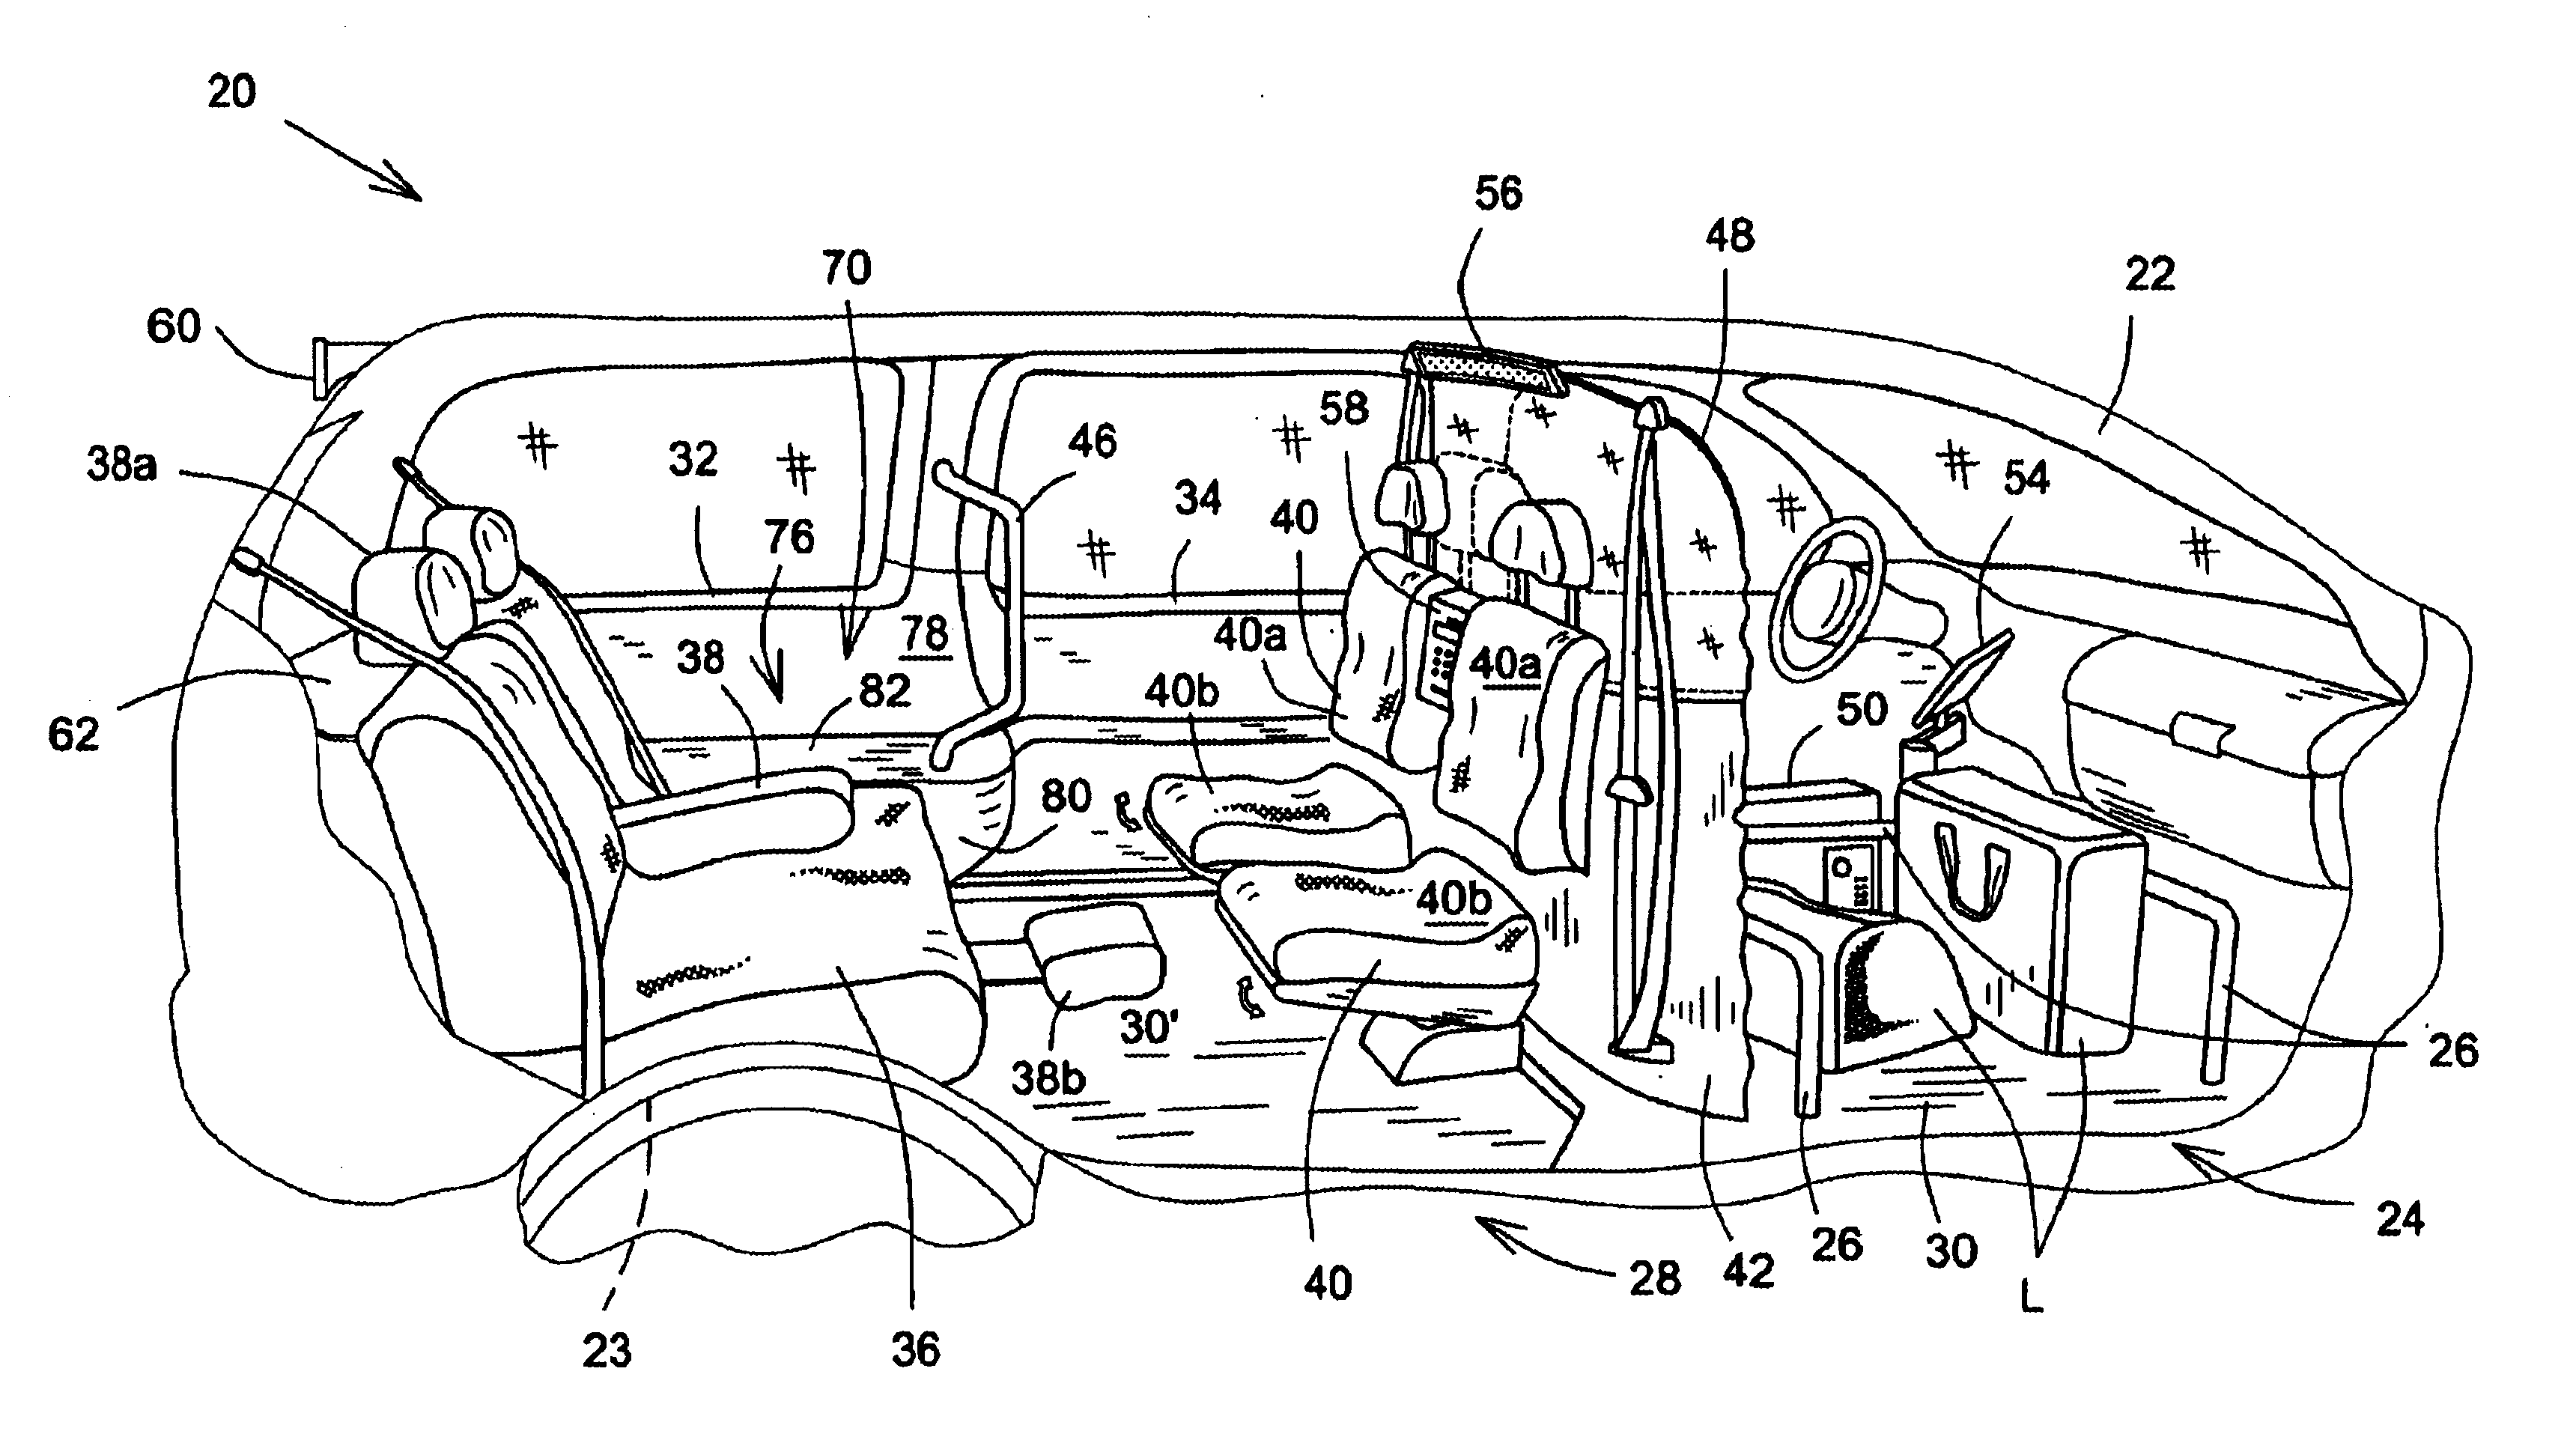 Seat for motor vehicle